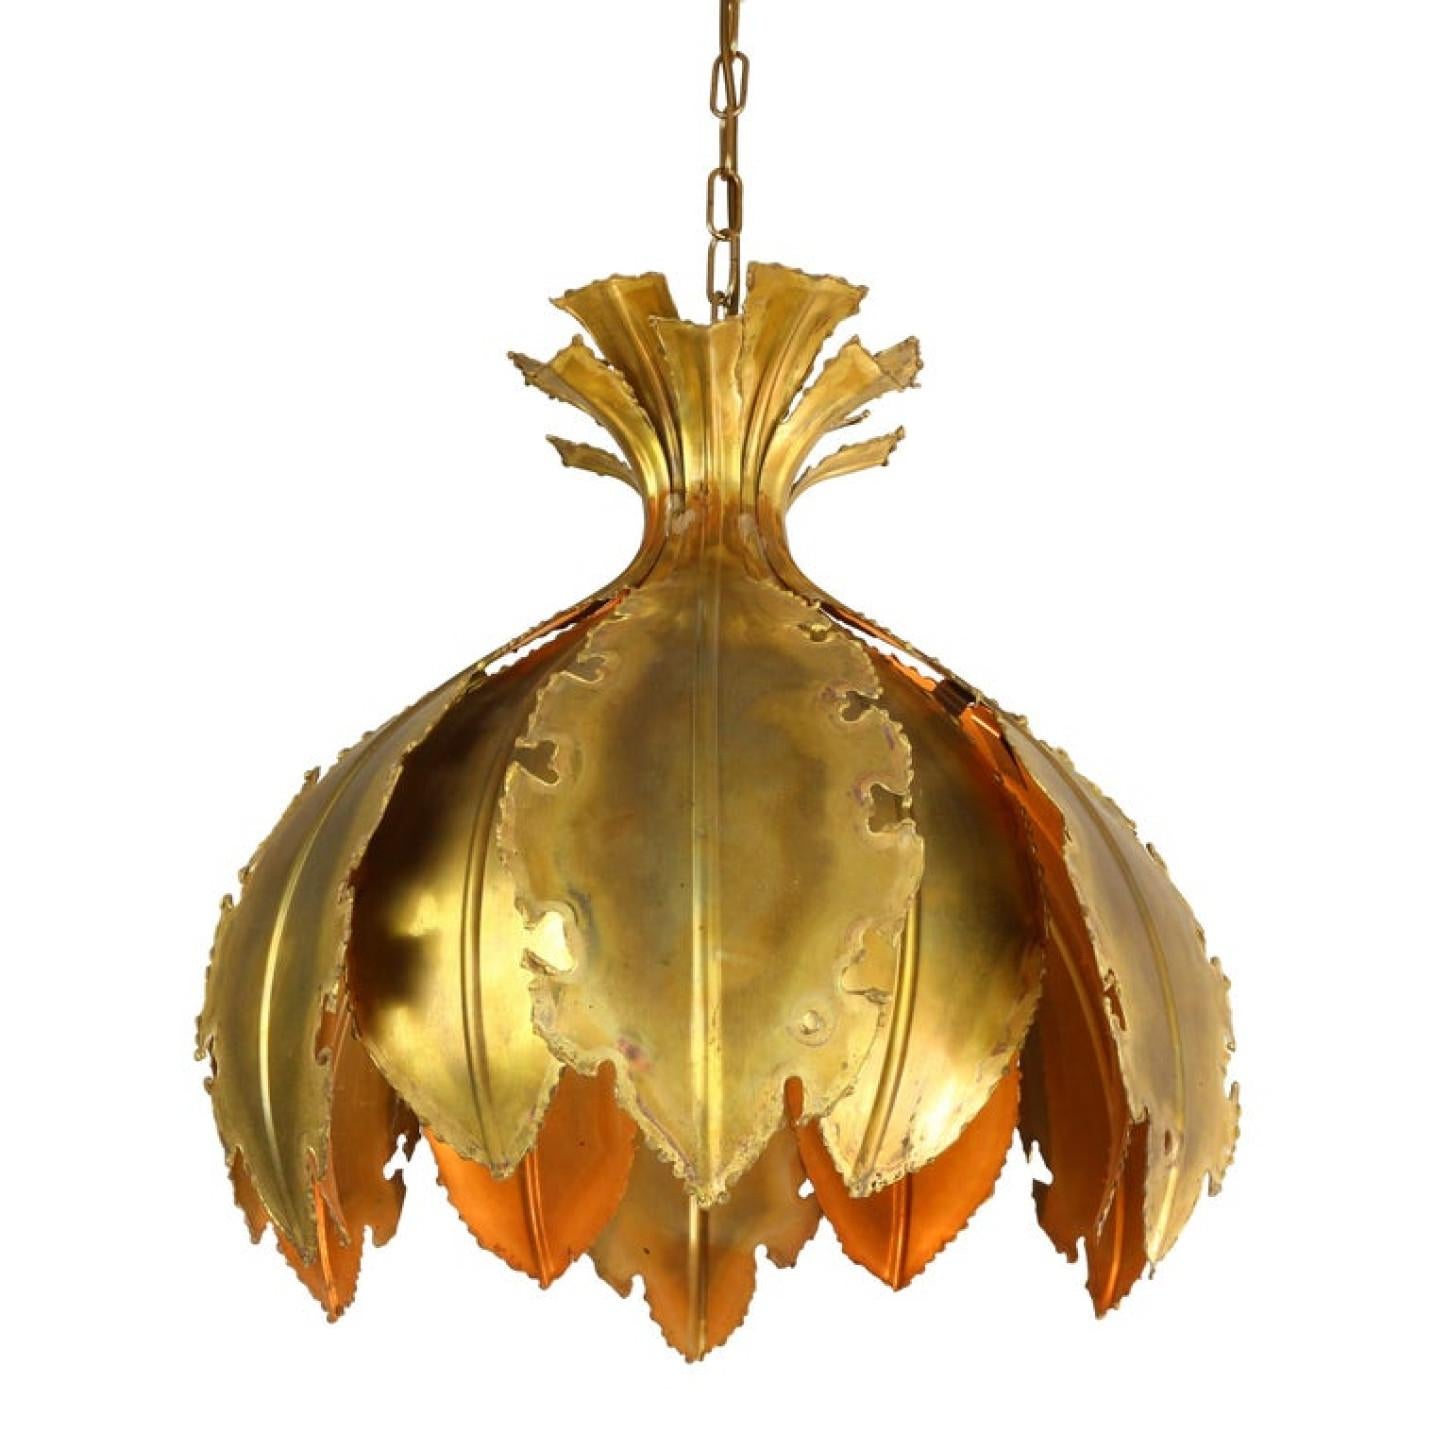 Other Pair of Svend Aage for Holm Sorensen Brutalist Acid Treated Brass Pendant Lamps For Sale